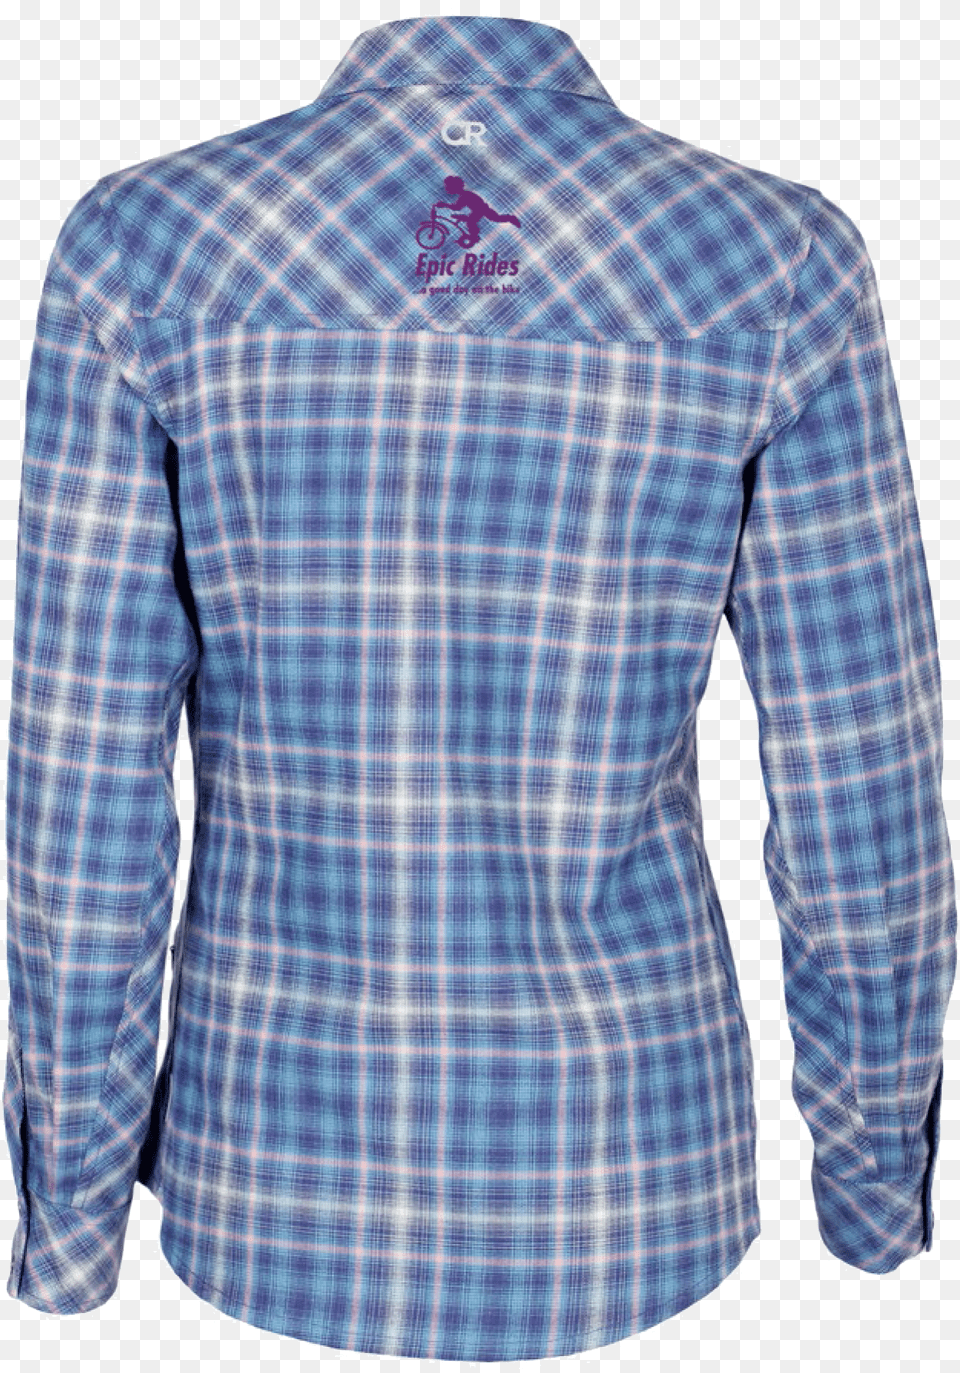 2017 Tour Of The White Mountains Flannel Jersey Shirt, Clothing, Dress Shirt, Long Sleeve, Sleeve Free Transparent Png